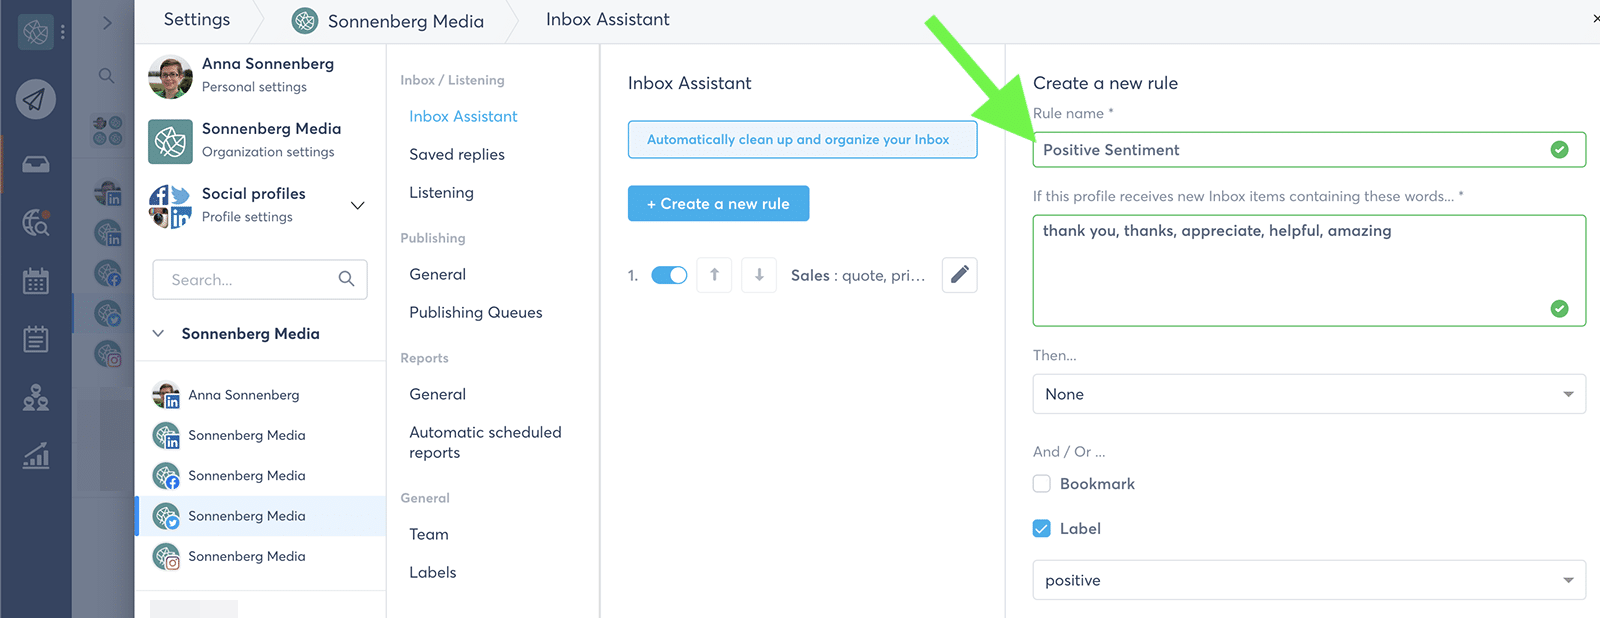 how to track customer sentiment automatically